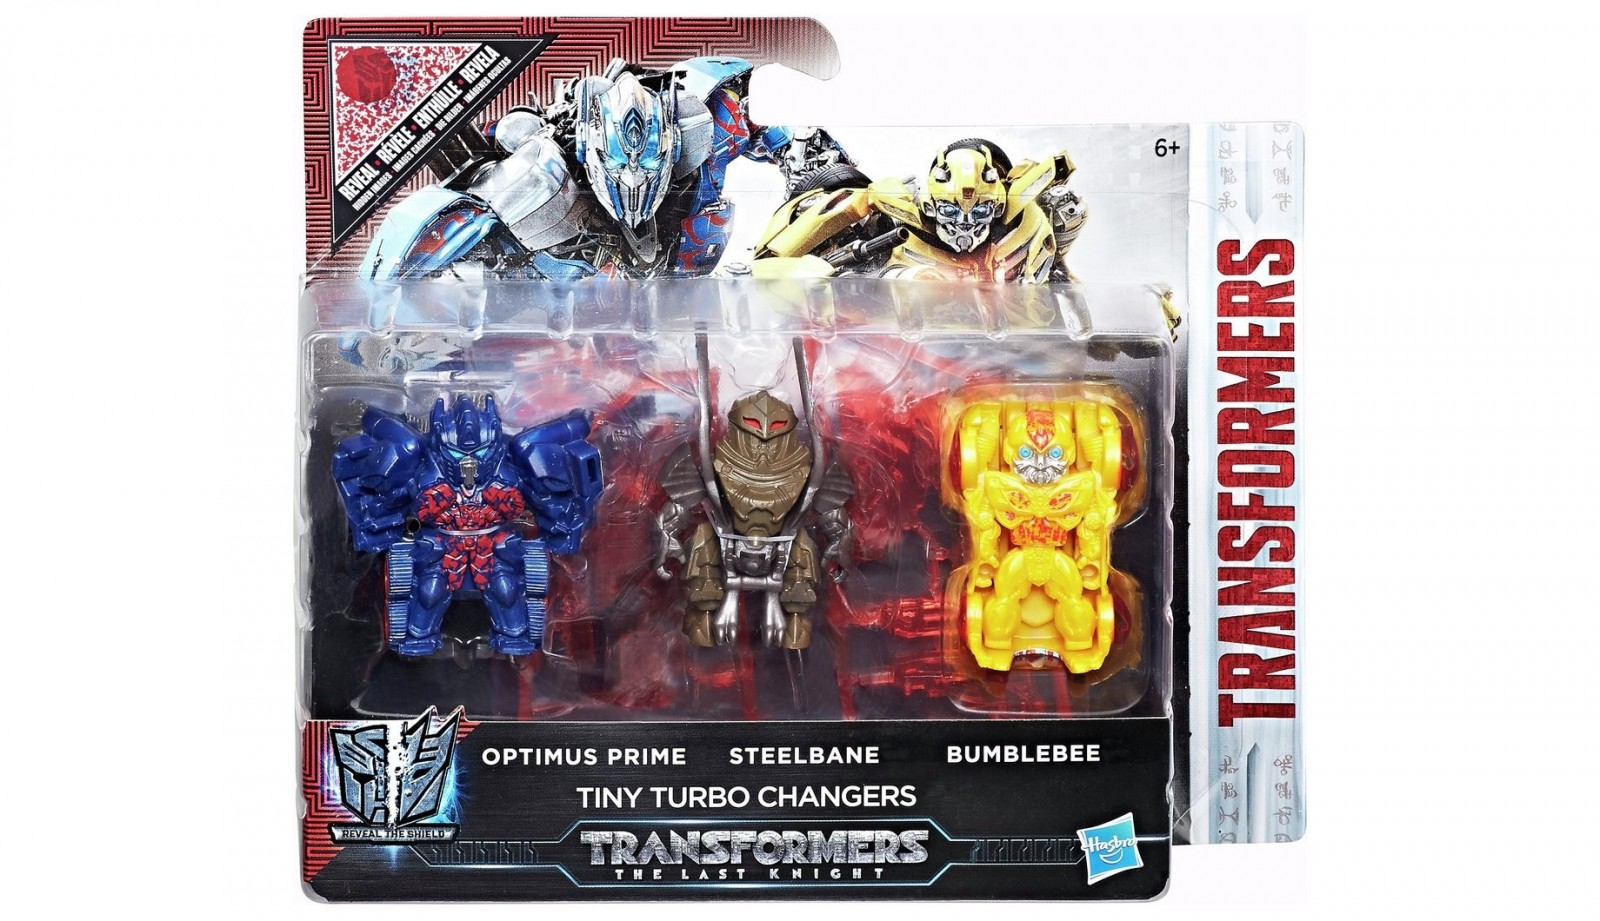 Transformers News: Official Images of Tiny Turbo Changer Steelbane and 3 Pack from Transformers: The Last Knight